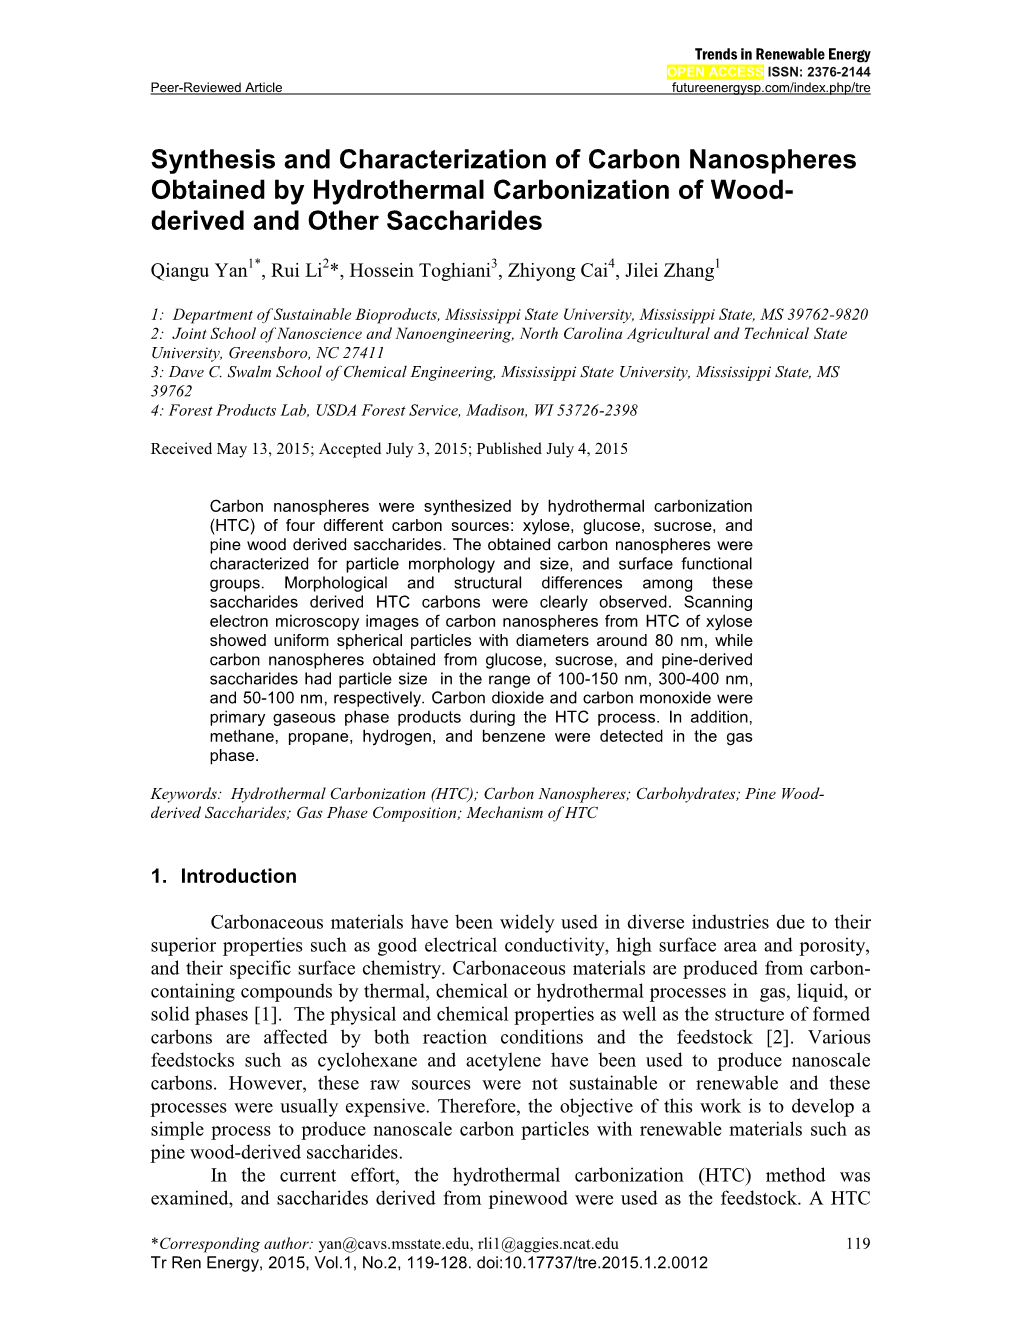 Synthesis and Characterization of Carbon Nanospheres Obtained by Hydrothermal Carbonization of Wood- Derived and Other Saccharides